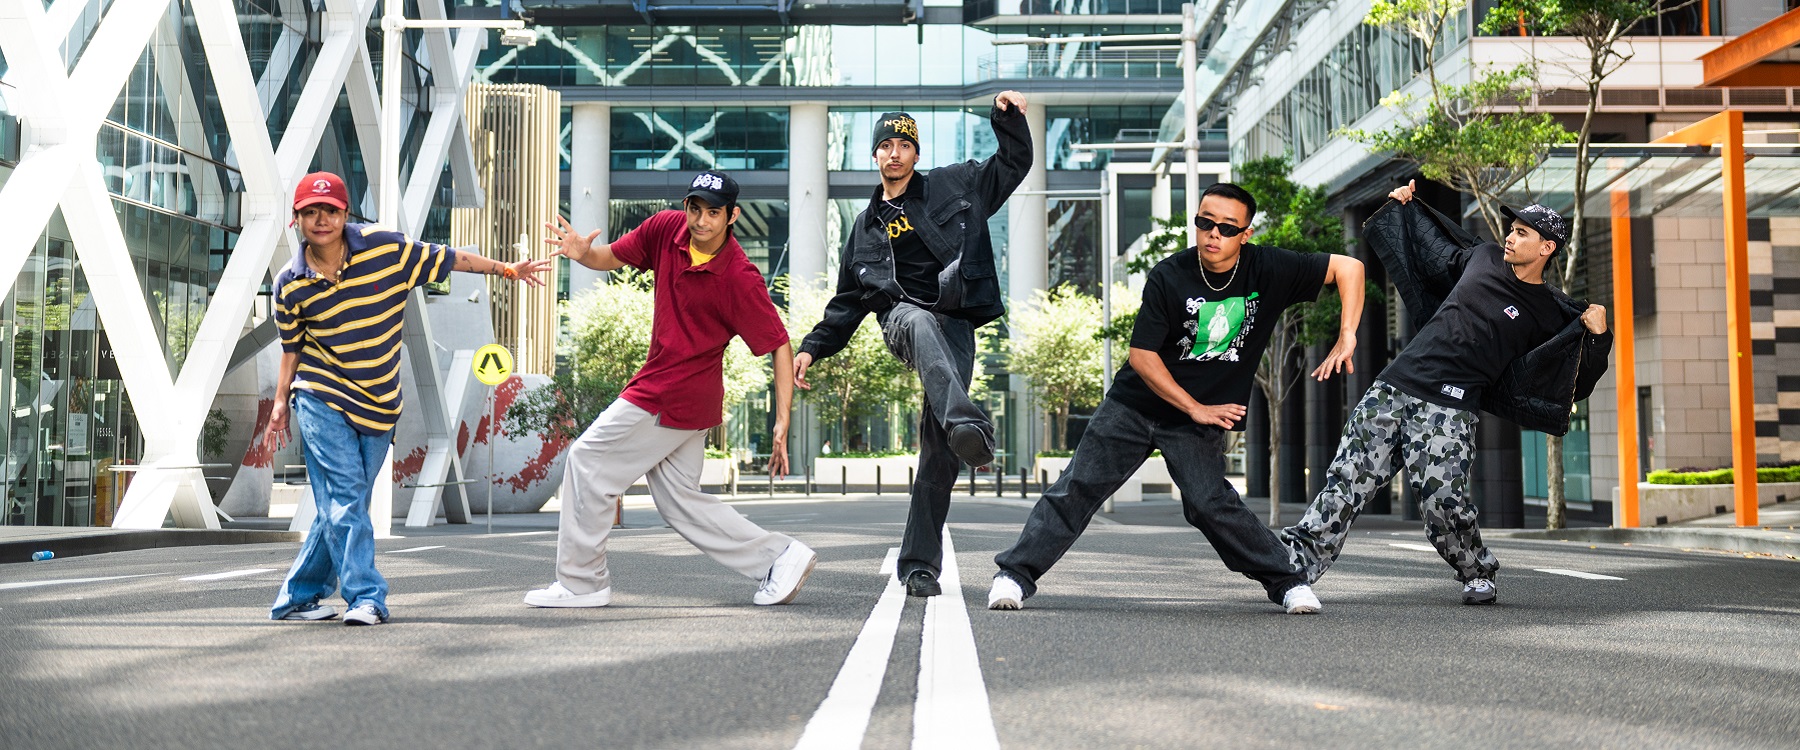 Photo of Stale Biskitz dancers posing in the street, 5 dancers pose in street dance style, they are on a road and two white lines run down the centre of the photo, corporate buildings are in the background and some trees to the side